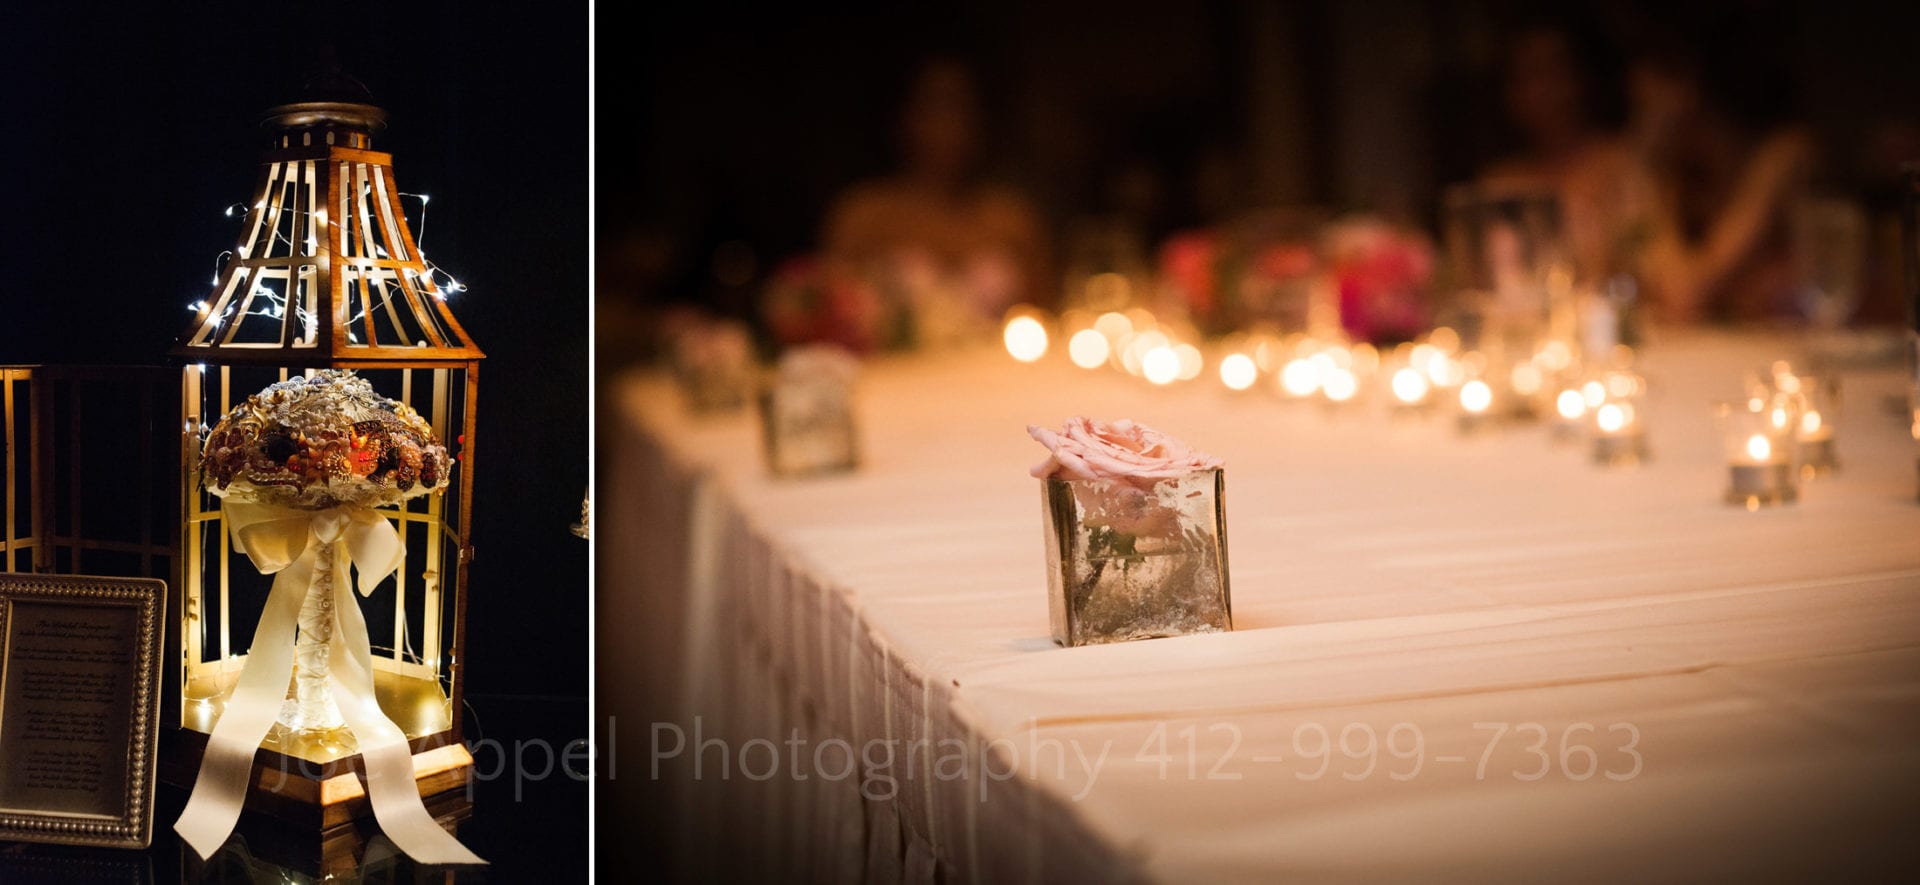 flowers inside of a lantern with fairy lights and pink roses in a vase